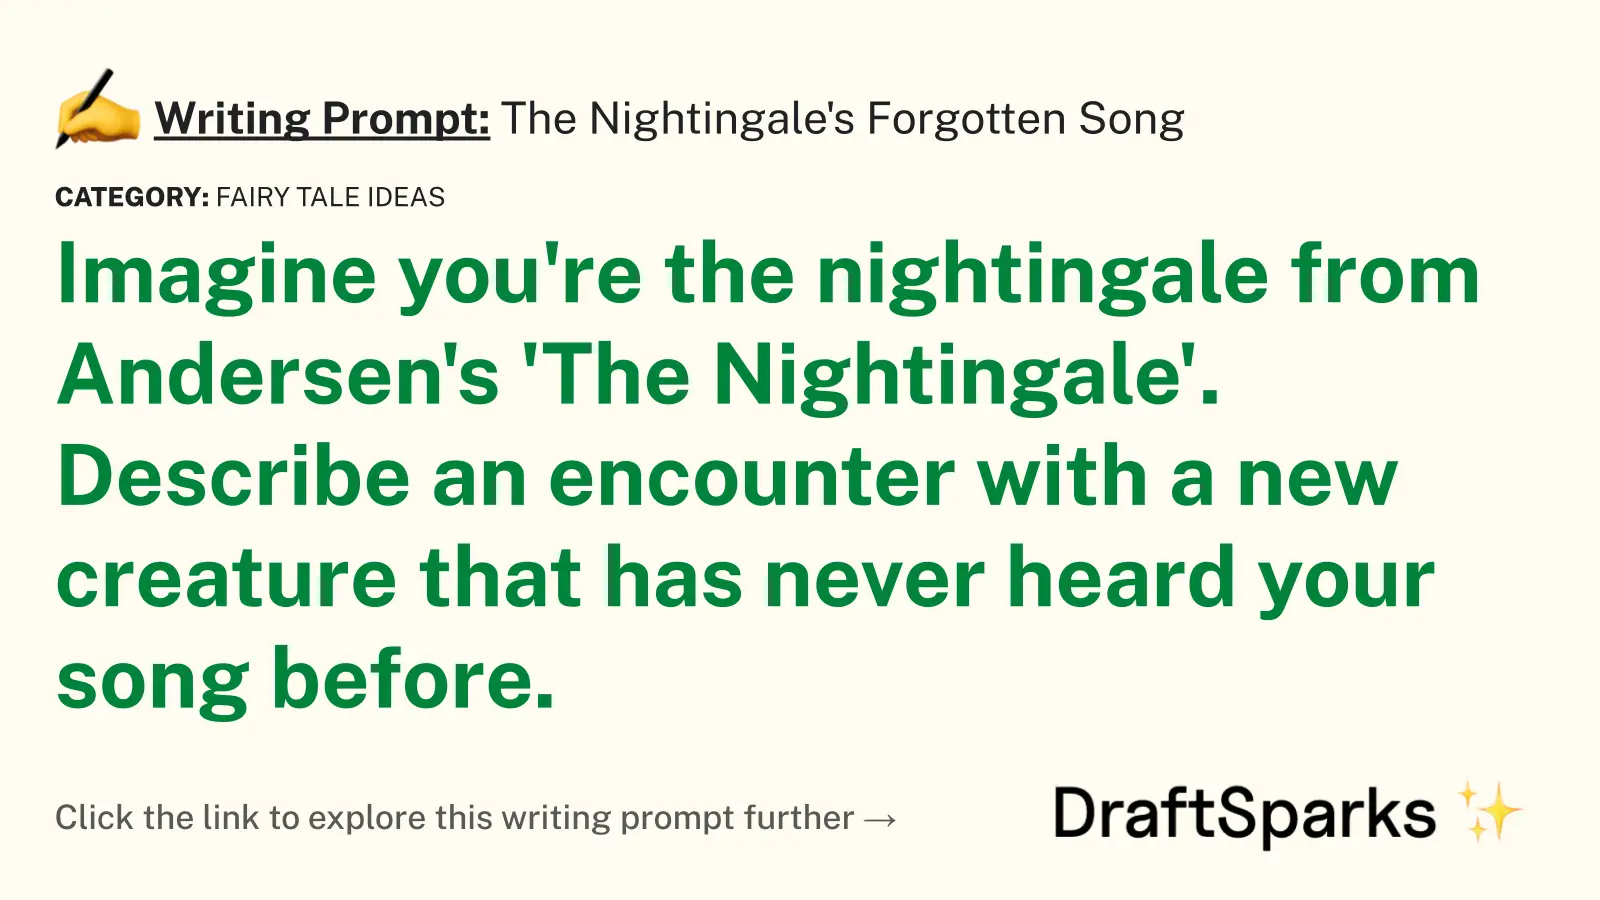 The Nightingale’s Forgotten Song